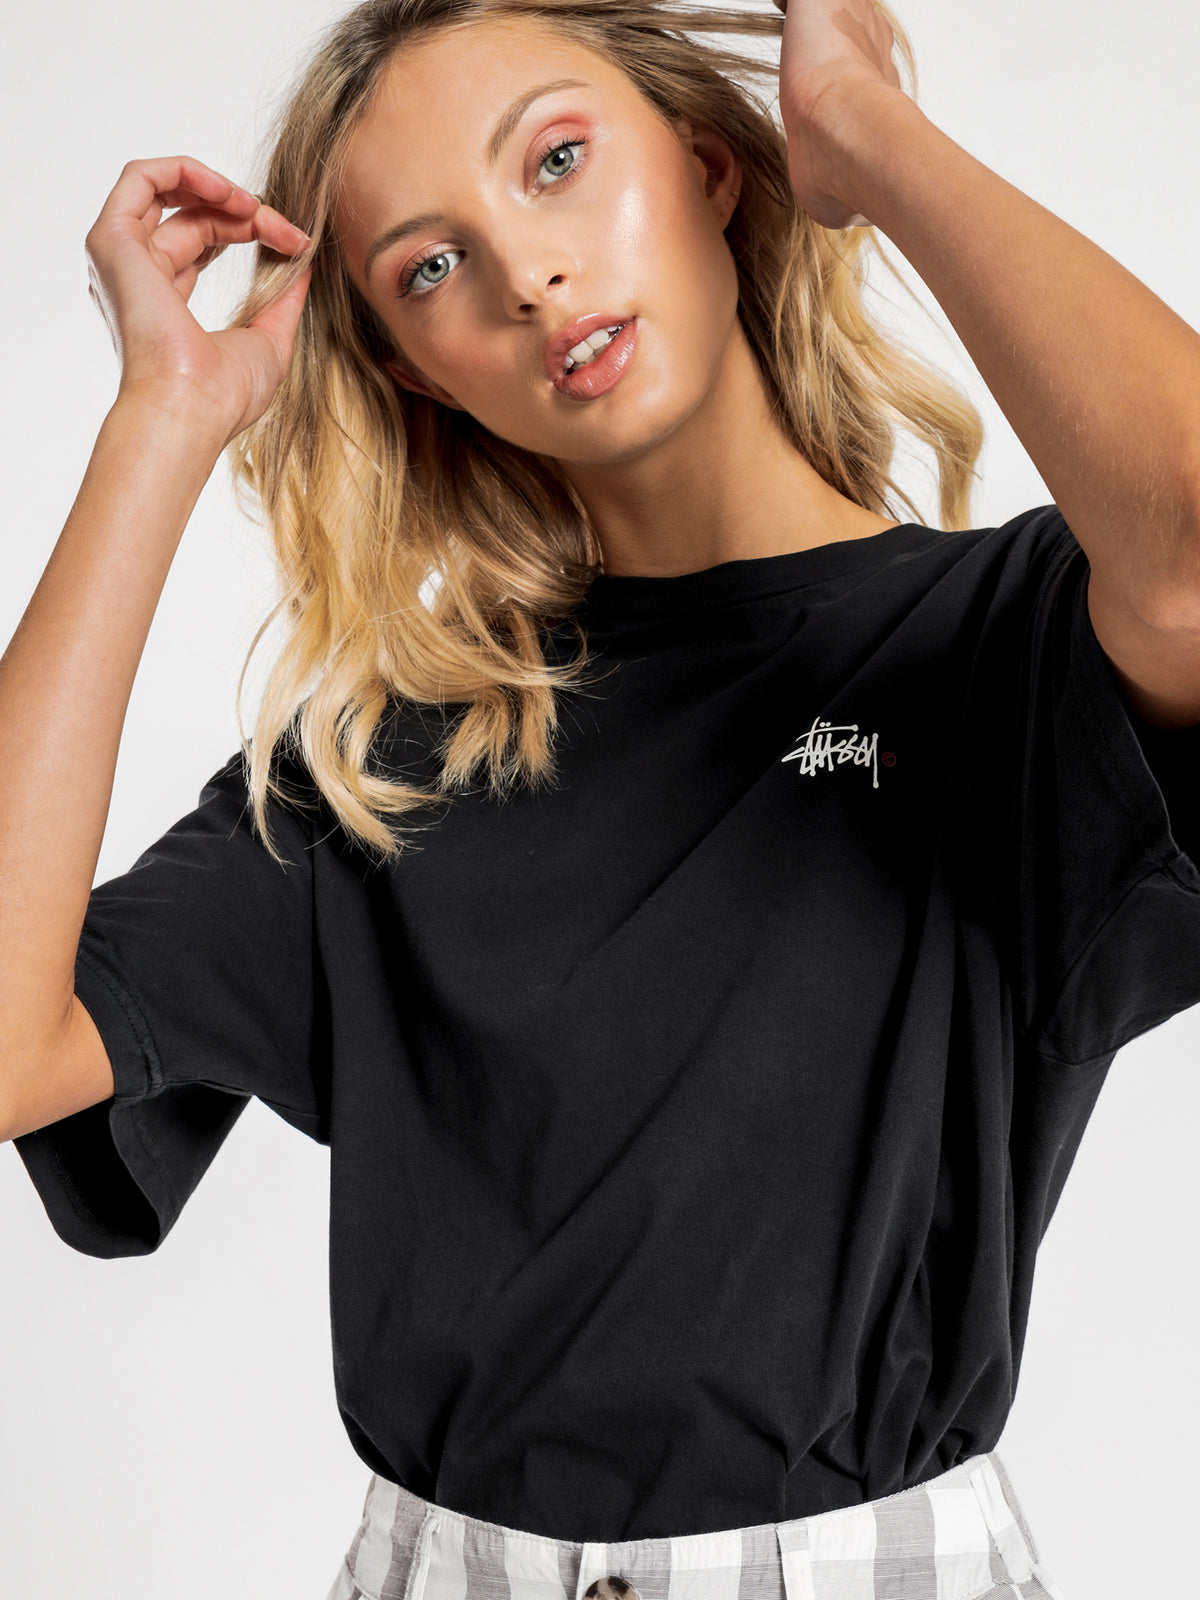 Graffiti Pigment Relaxed T-Shirt in Black